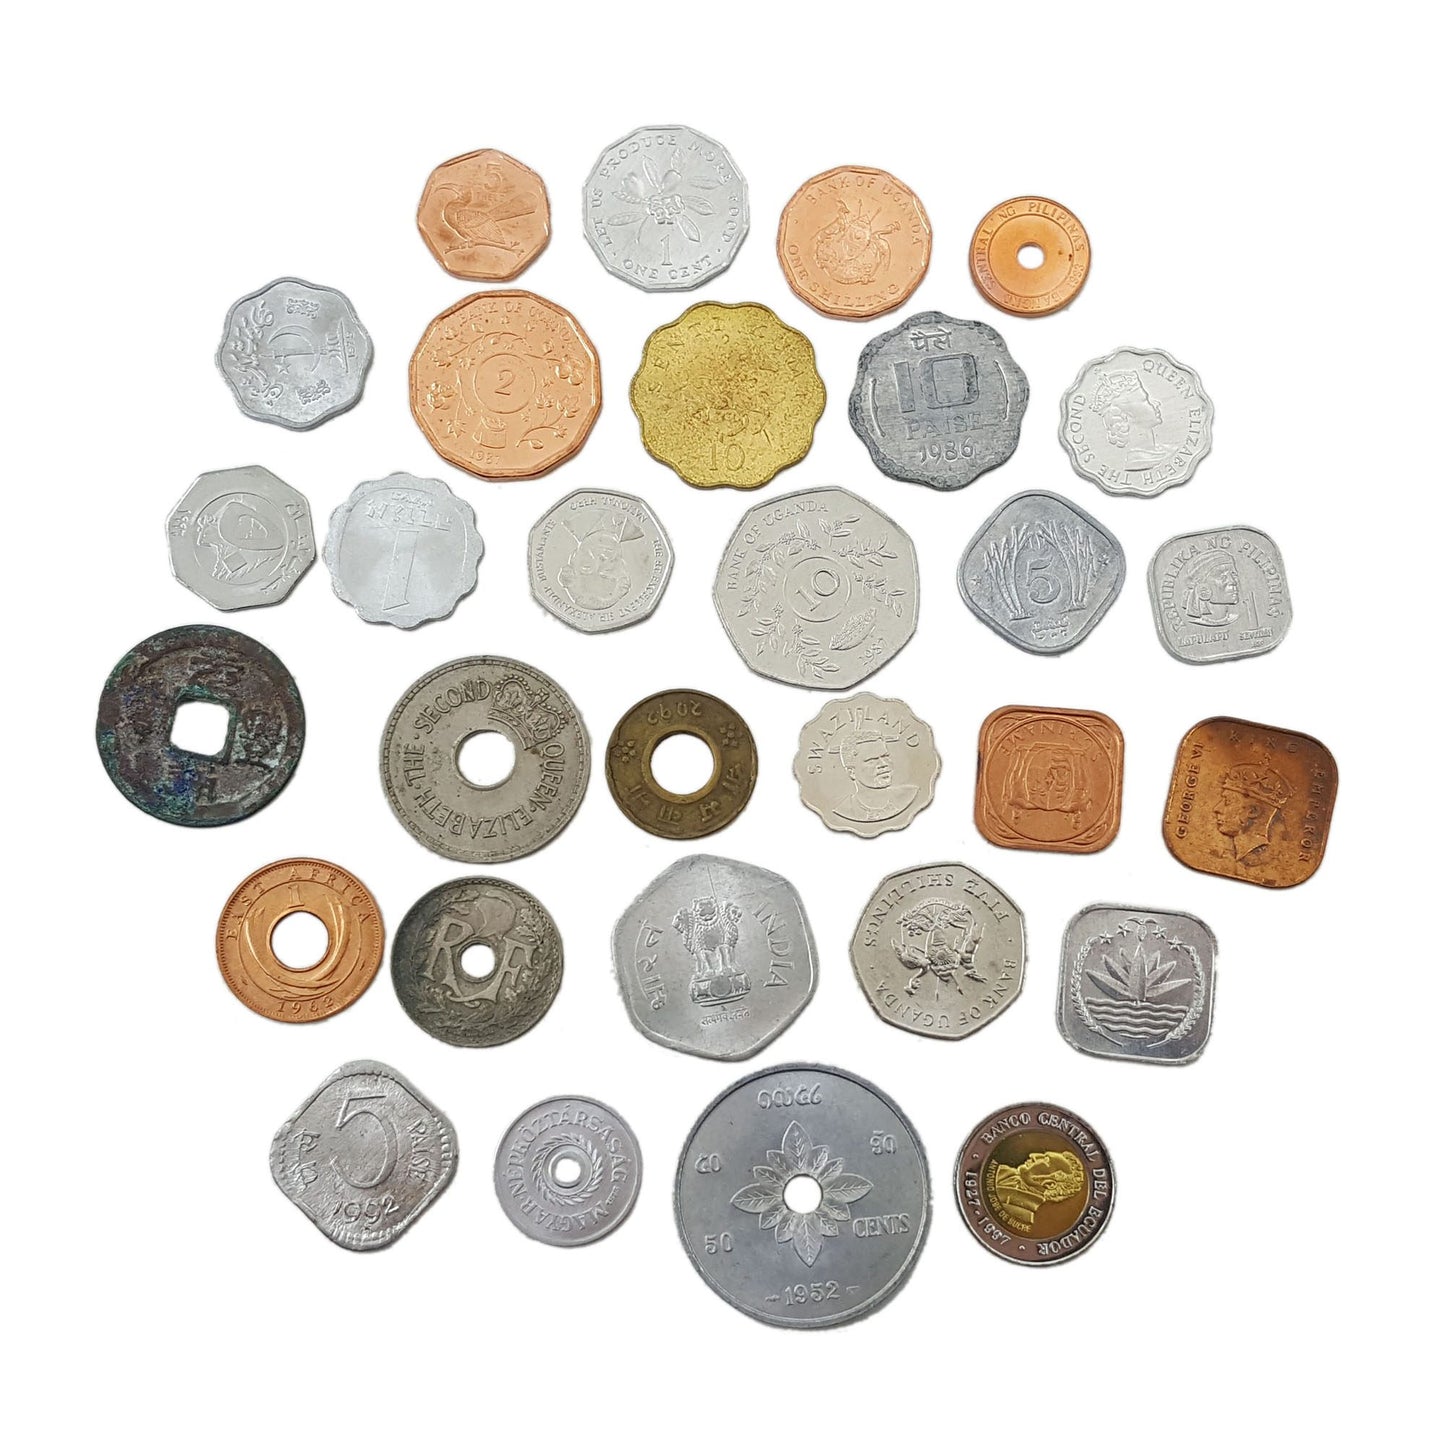 Odd Shaped Coins - Set of 30 Different Coins from Around the World